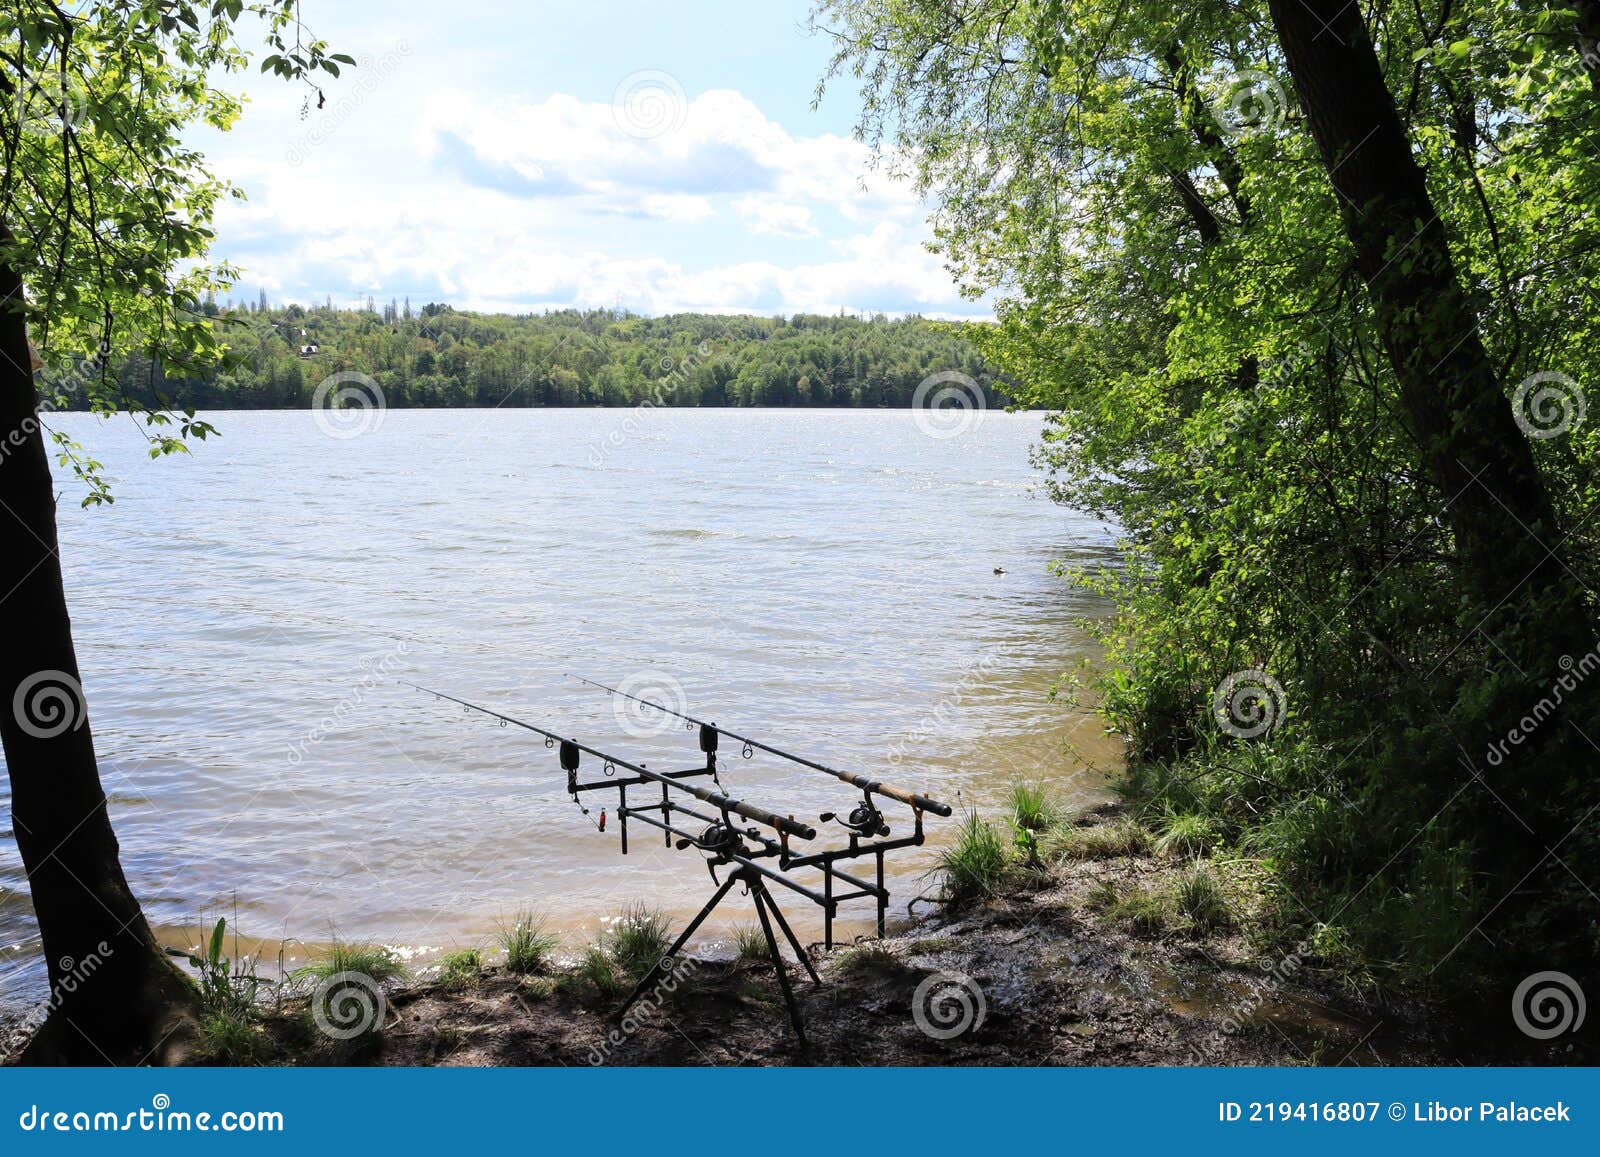 Fishing Stand with Fishing Rods by the Water. Carp Fishing on the